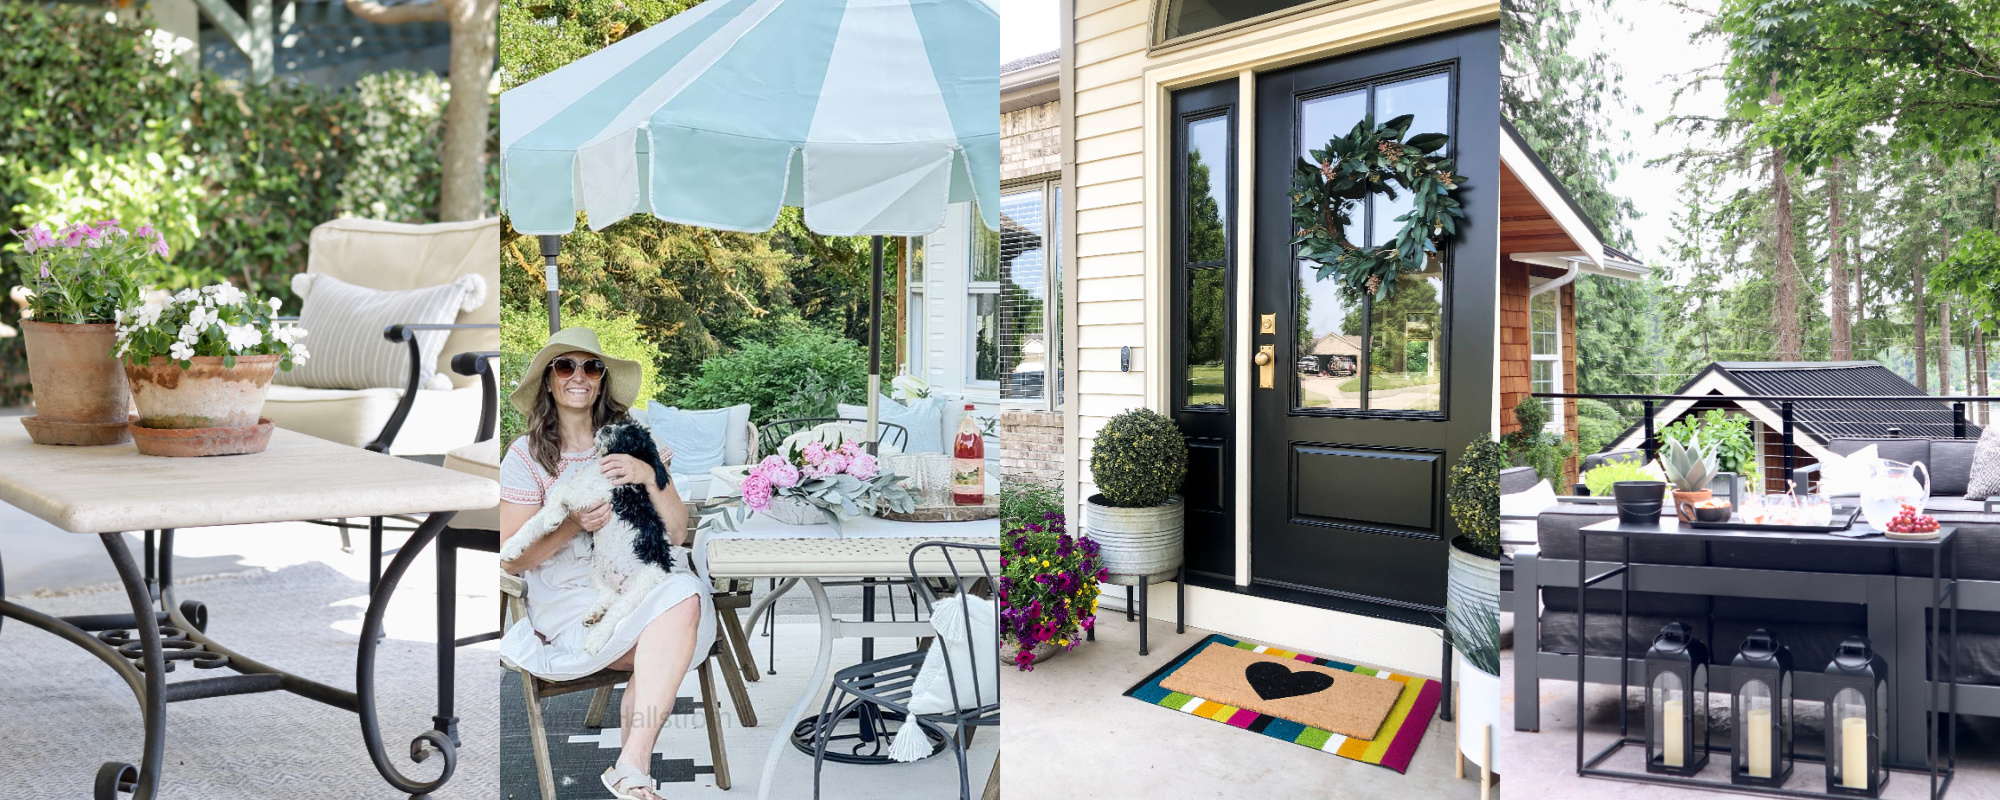  Family Patio Ideas by popular Alabama life and style blog, She Gave It A Go: collage image of a white and black metal coffee table, a woman sitting at a table with blue and white shade umbrella while holding her black puppy, a black front door with a bay leaf wreath, and a black metal table with a tray of drinks. 